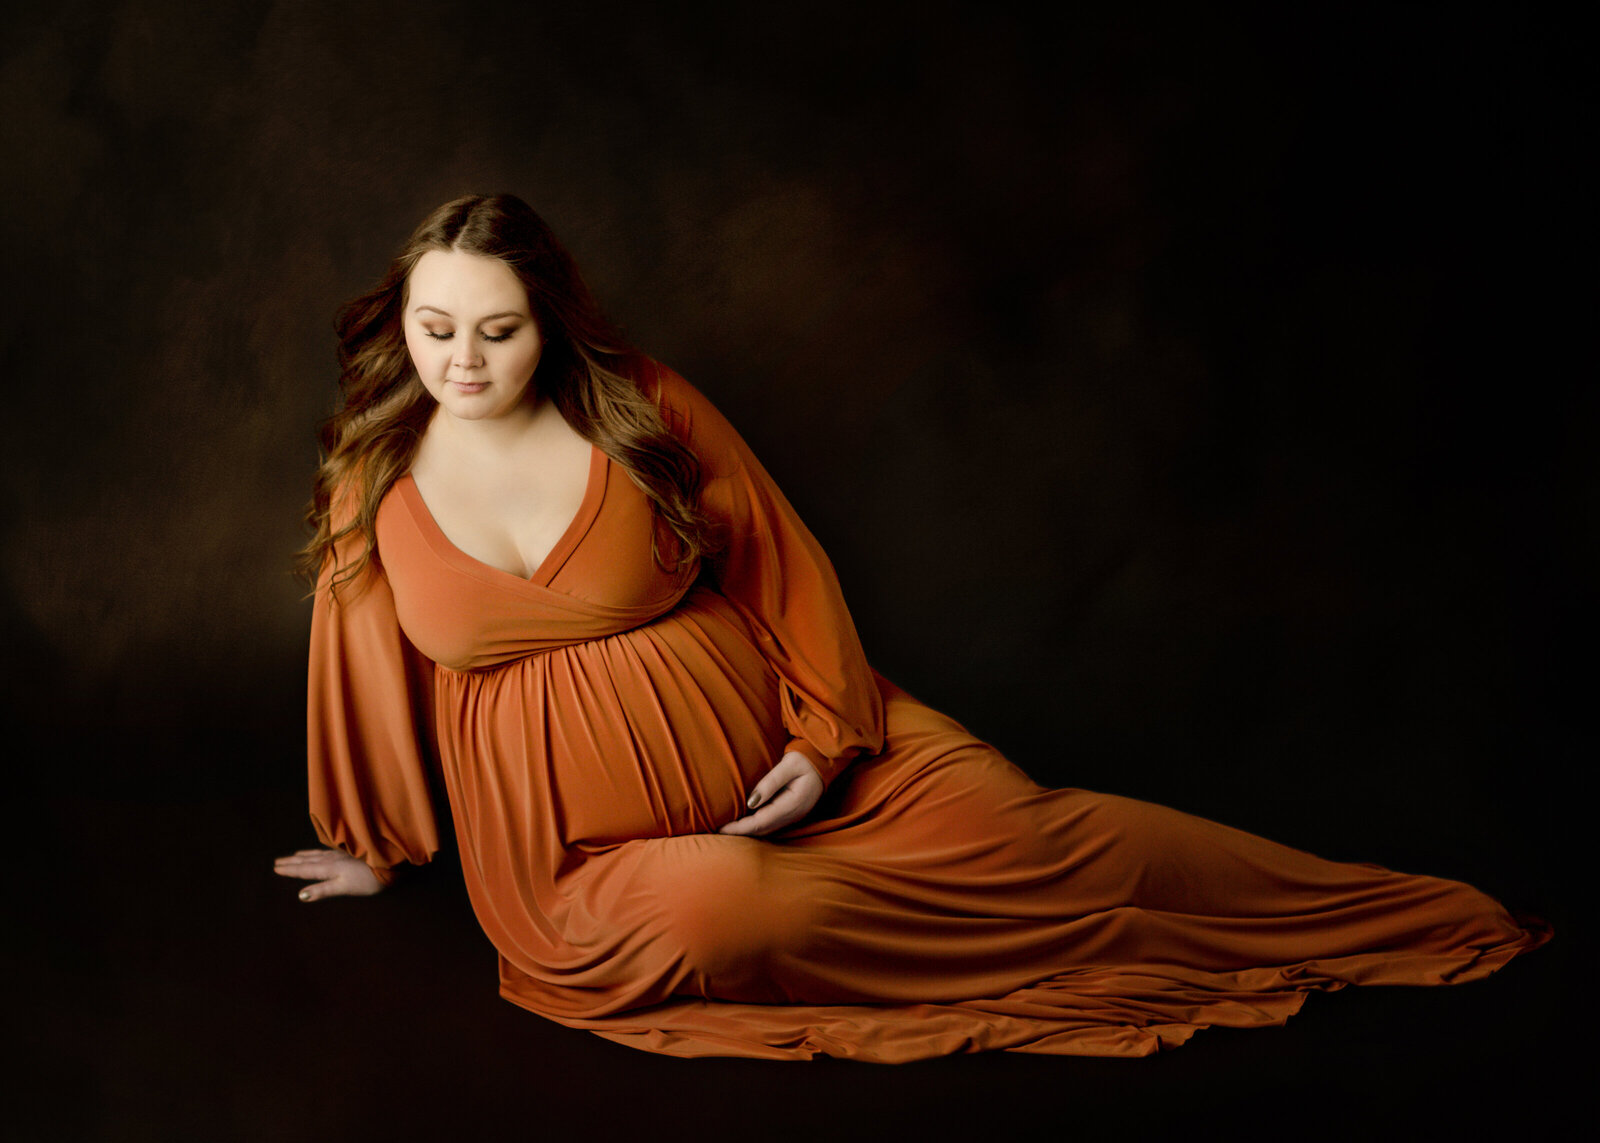 Pregnant woman sitting on the ground in a orange gown